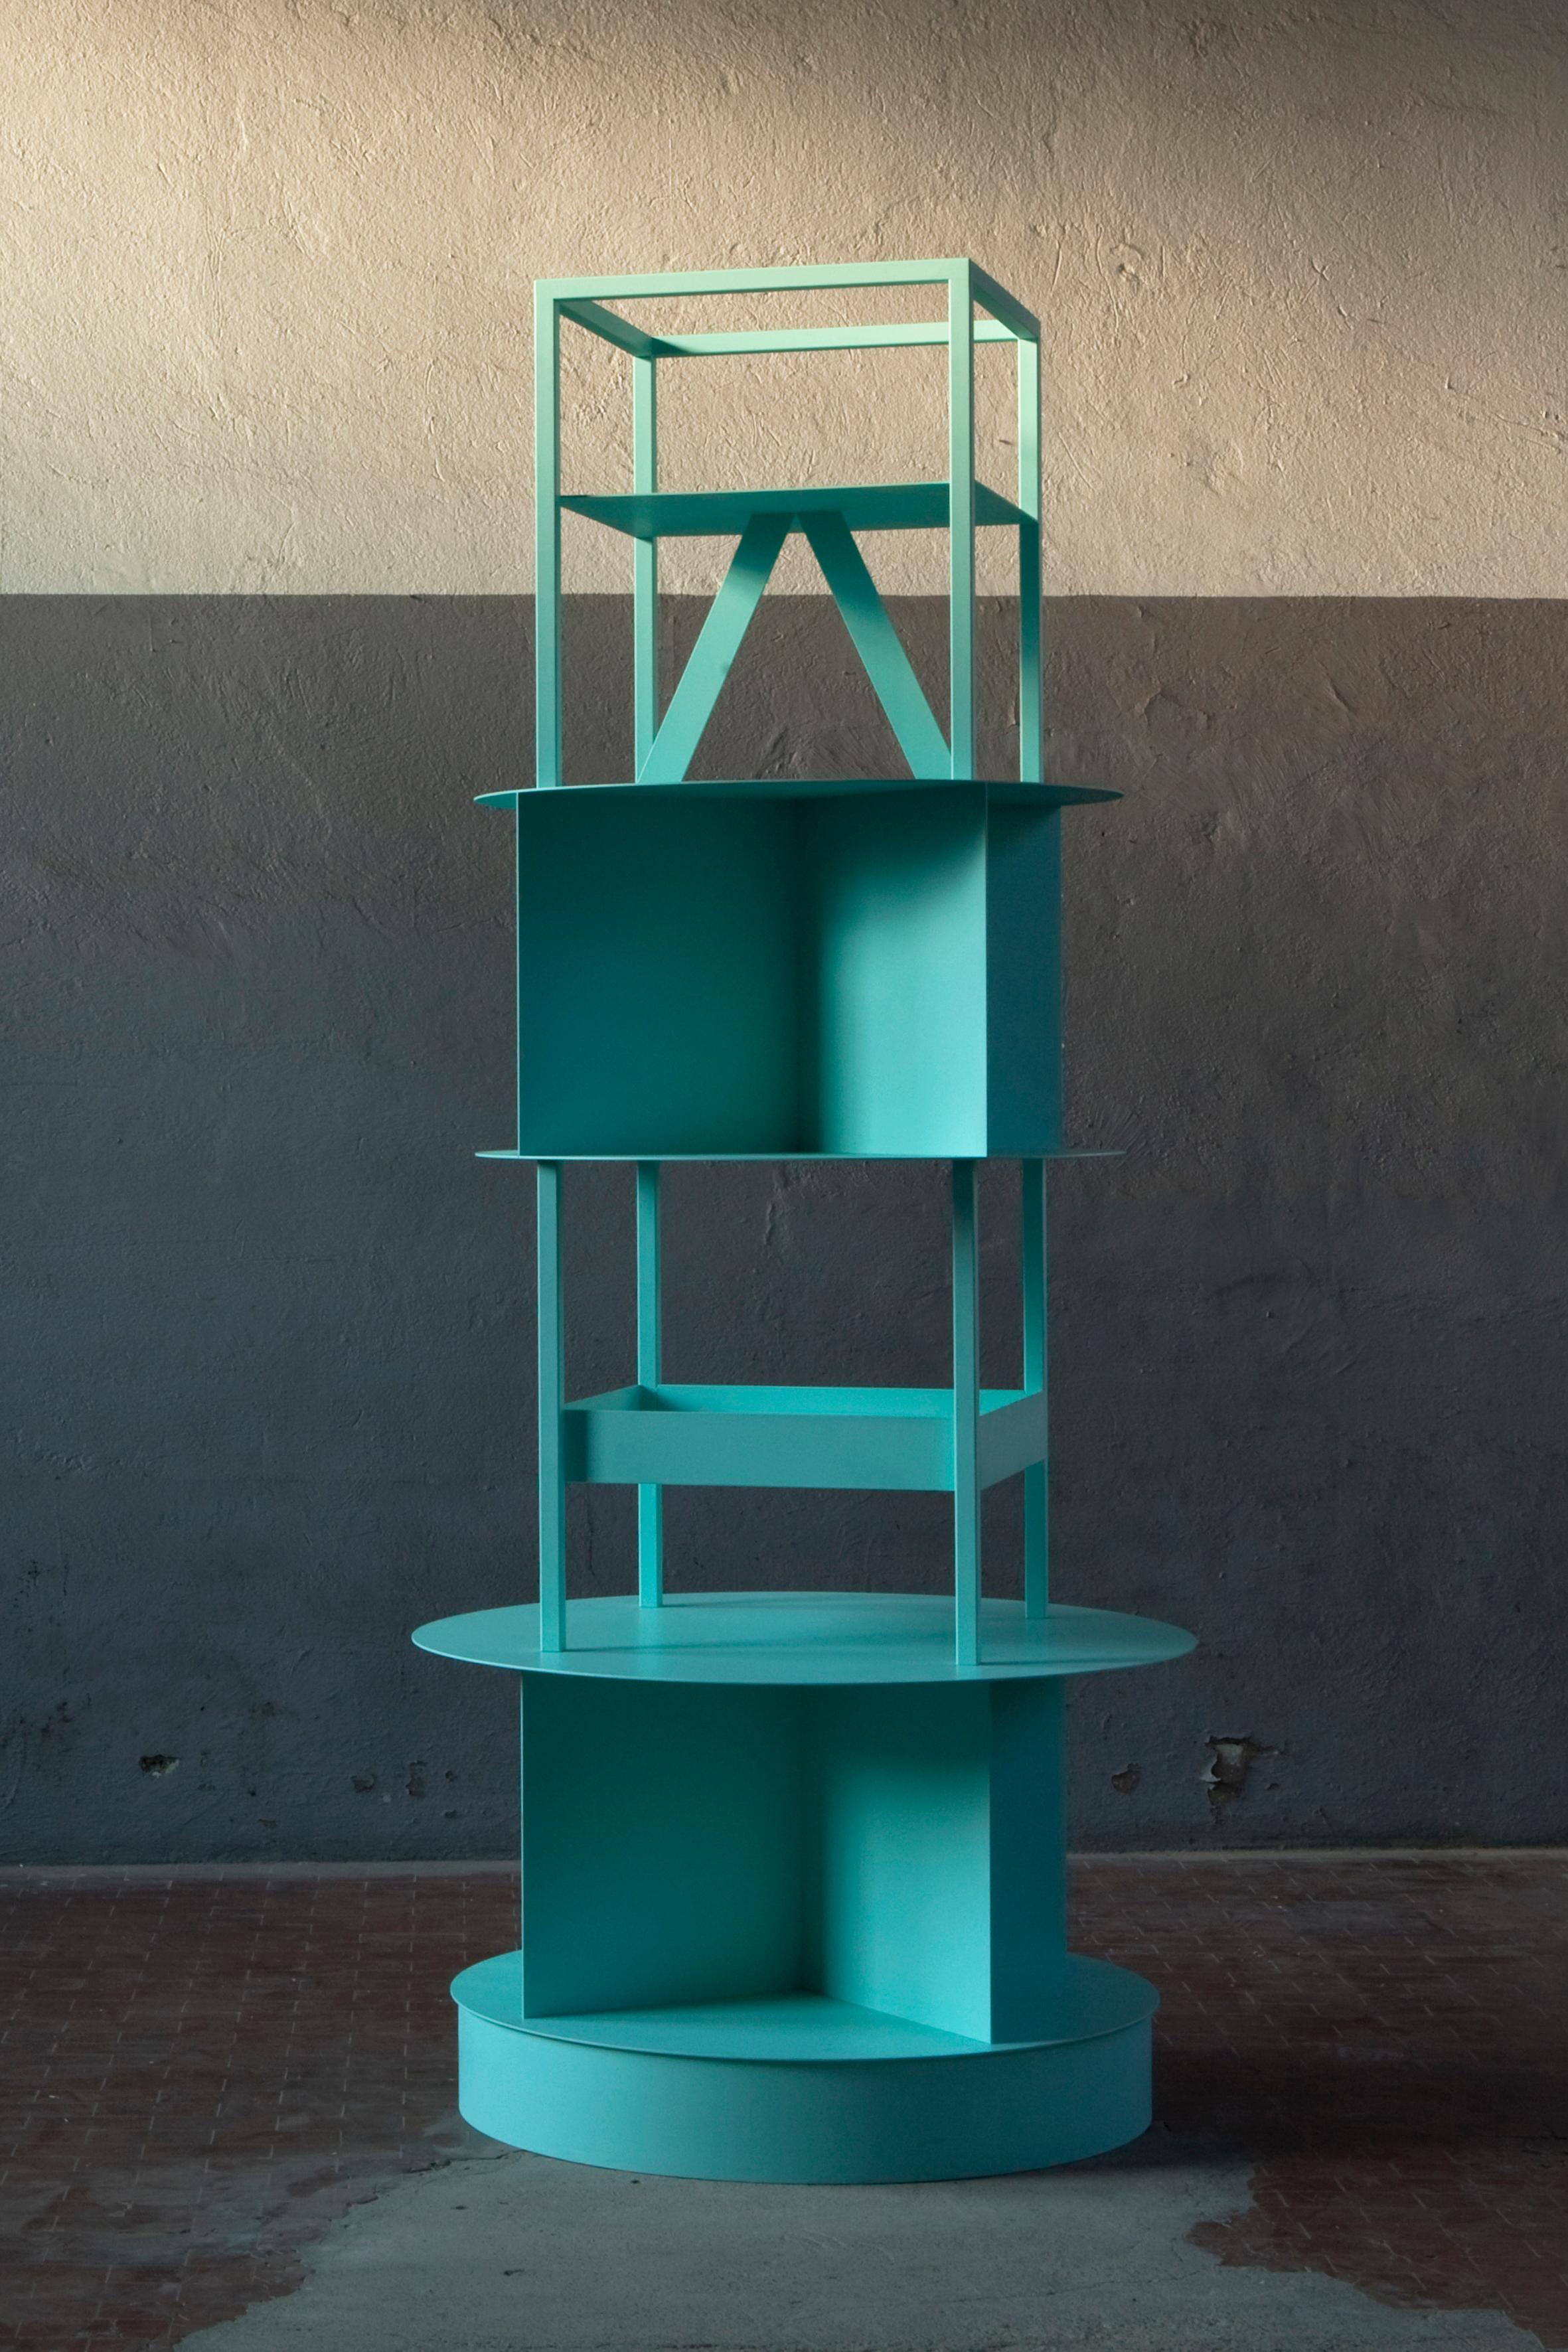 Laveer TOTEM by Oeuffice
Edition: 8 + 2AP
2011
Dimensions: 105 x 105 x 220 cm
Materials: Hand curved steel with a mint-turquoise soft touch finish

The Laveer TOTEM is a formal exploration of simple engineering constructions. The changing